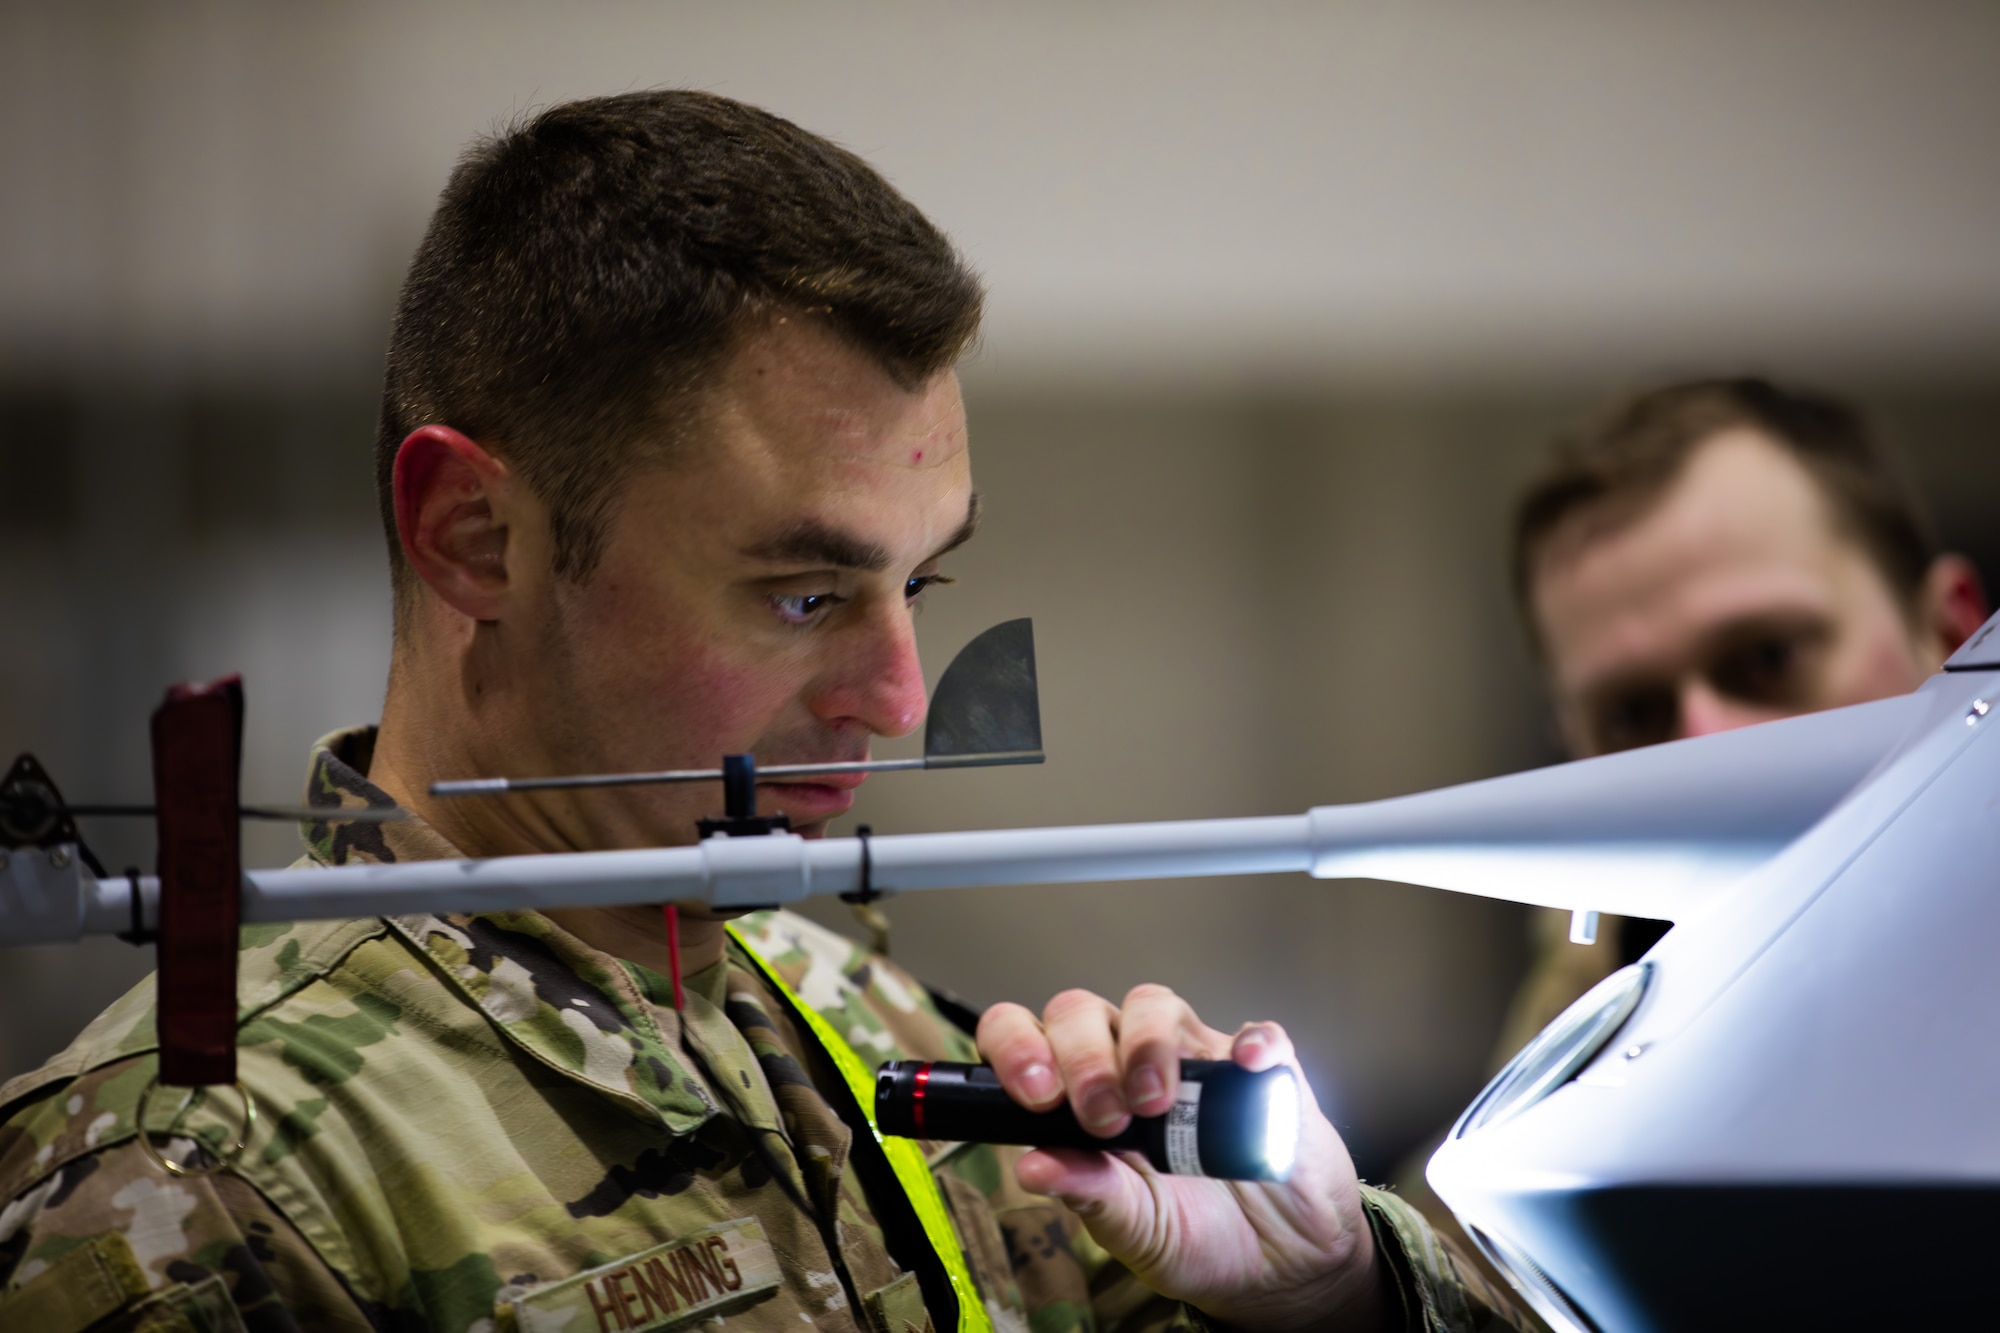 Tech Sgt. Todd Henning, an airman assigned to the 163rd Aircraft Maintenance Squadron inspects a remotely piloted MQ-9 Reaper in a 178th Wing hanger on Springfield-Beckley Air National Guard Base, Ohio, March 12, 2024. Exercise Advanced Wrath provides the 178th Wing with an opportunity to work with airmen from across the country. (U.S. Army National Guard photo by Staff Sgt. Thomas Moeger)